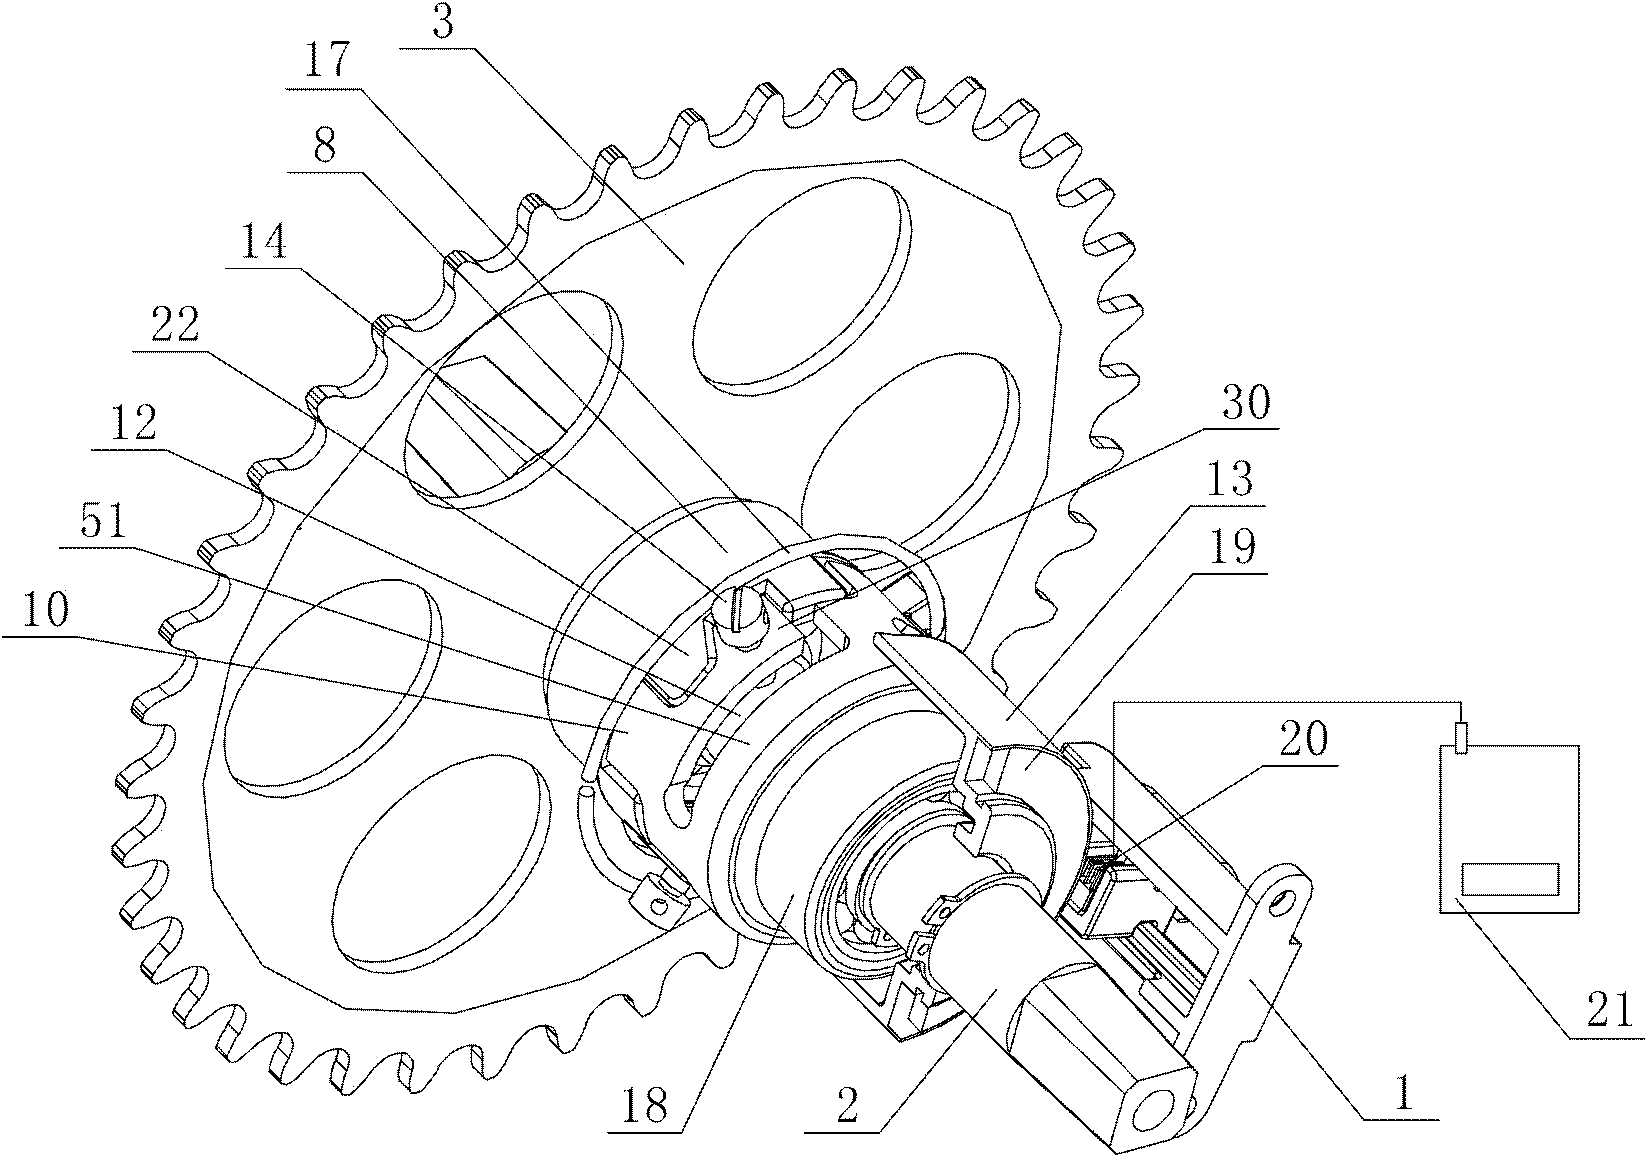 Power-assisted transmission mechanism for electric power-assisted bicycle